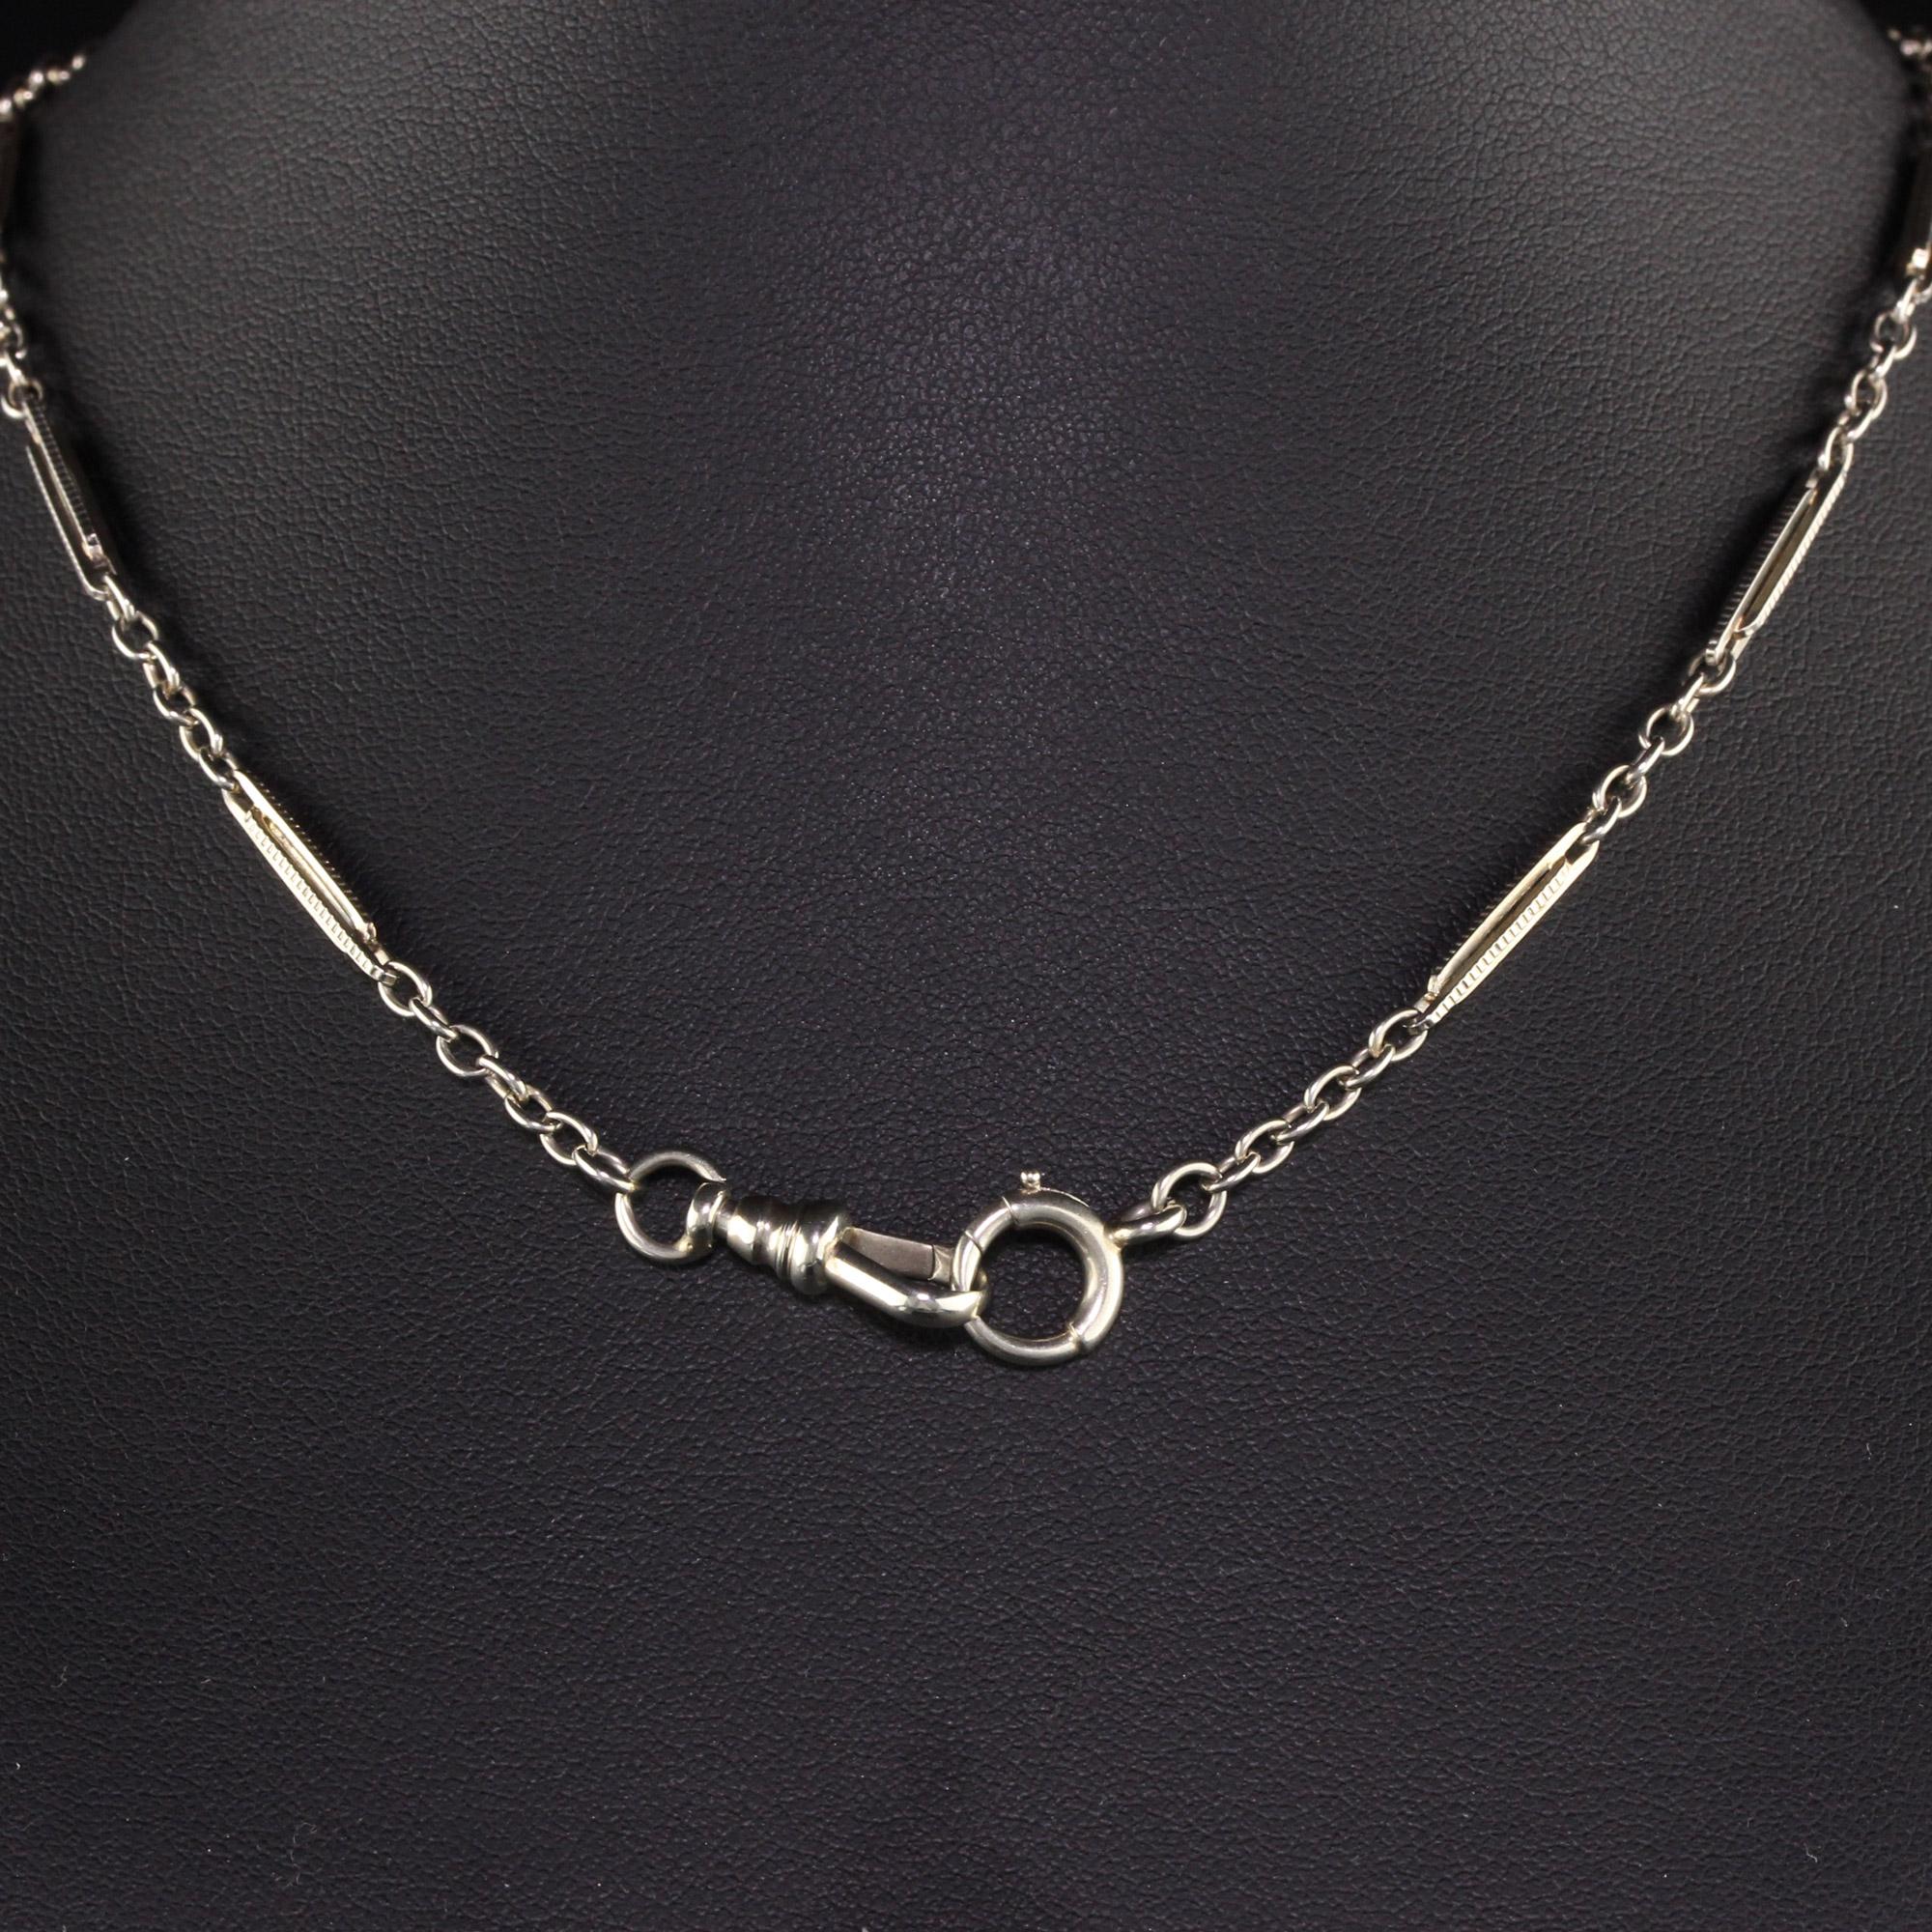 Antique Art Deco 18K White Gold Intricate Link Chain In Good Condition For Sale In Great Neck, NY